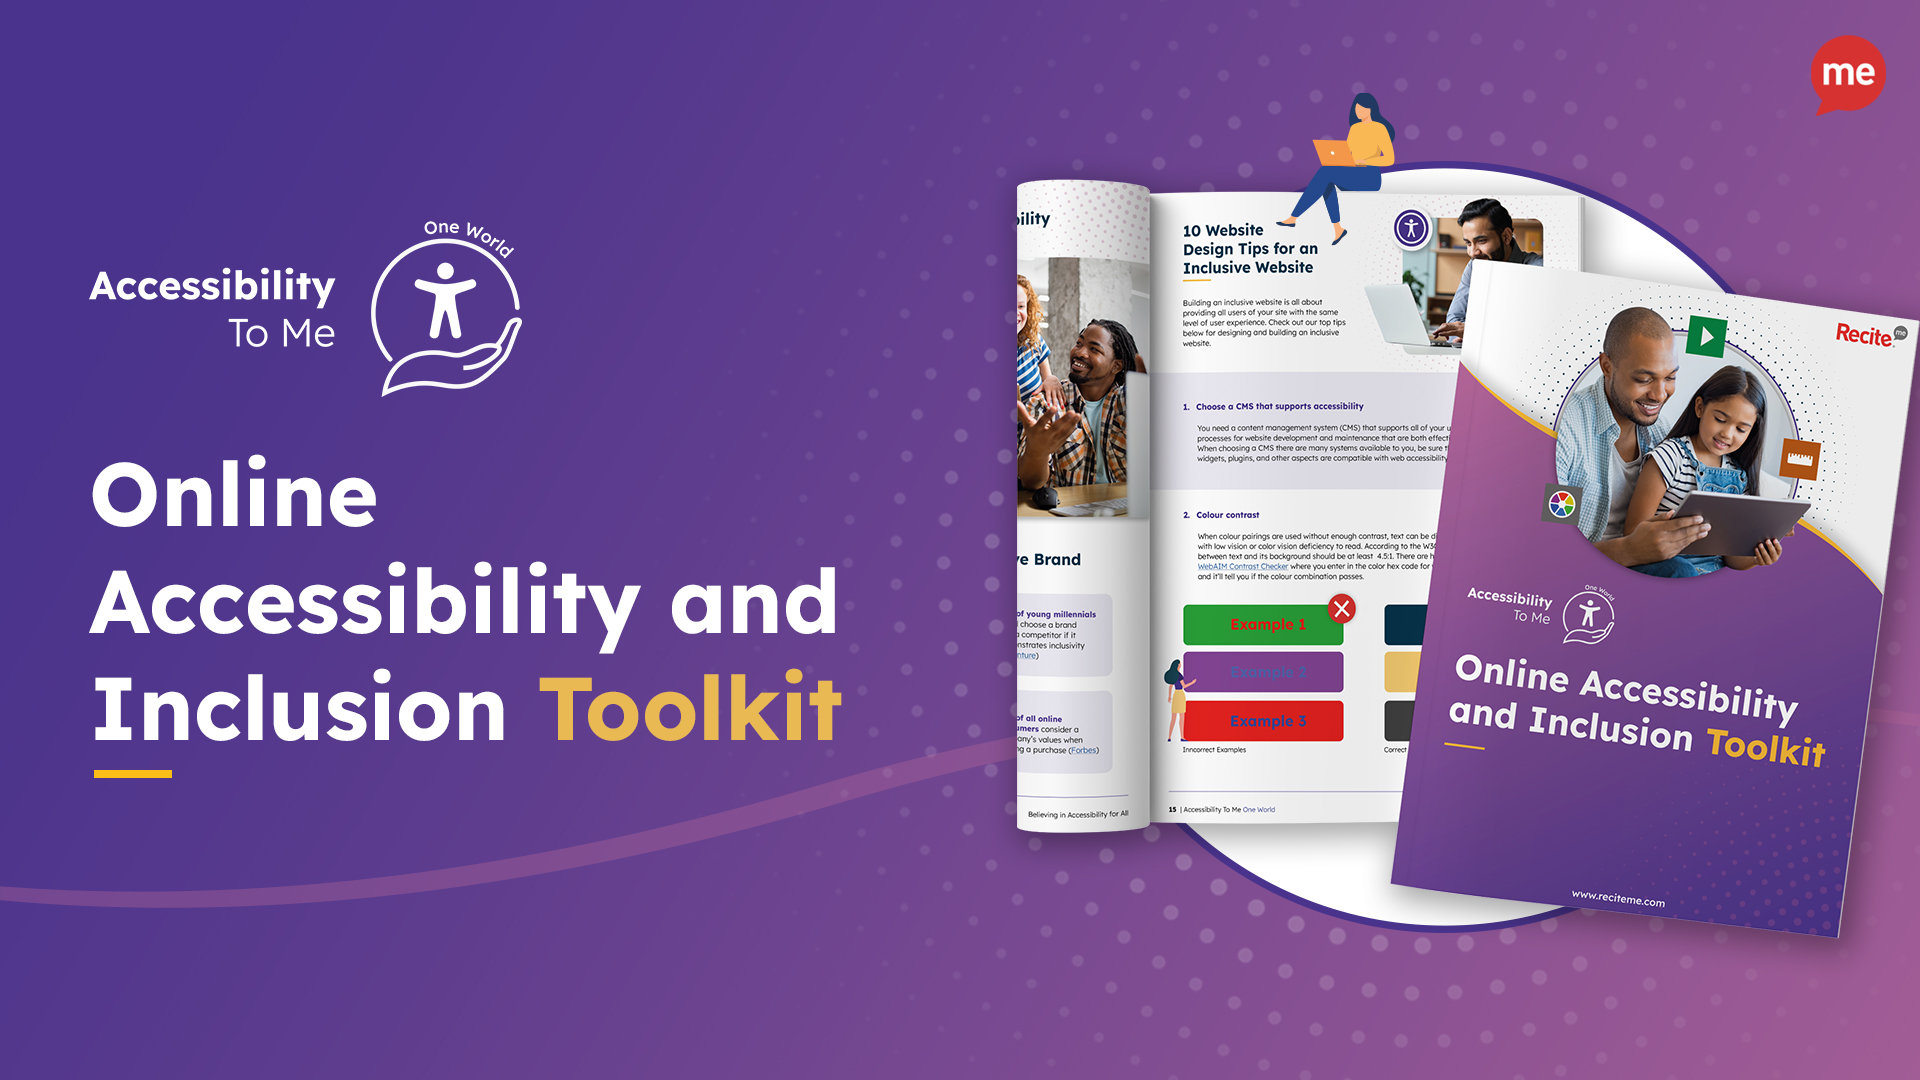 Online Accessibility and Inclusion Toolkit